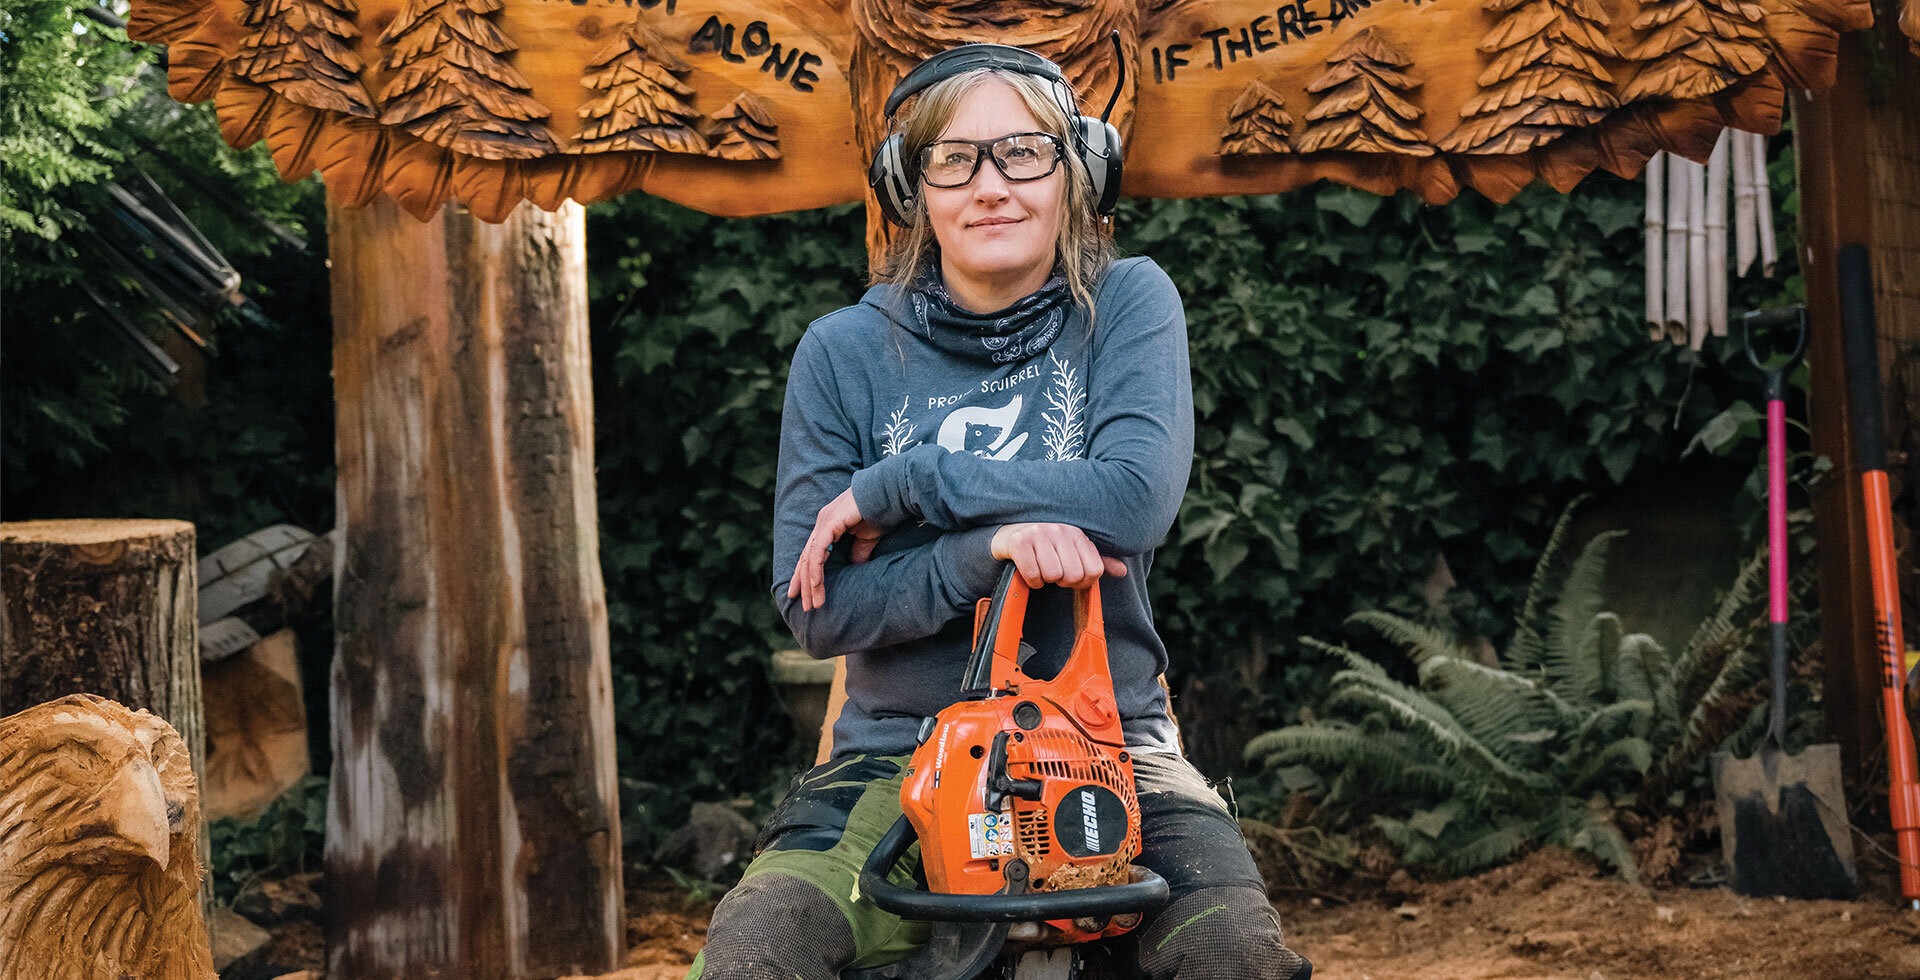 In her Bellingham backyard Leigh Woody creates chainsaw art centered around outdoor themes.